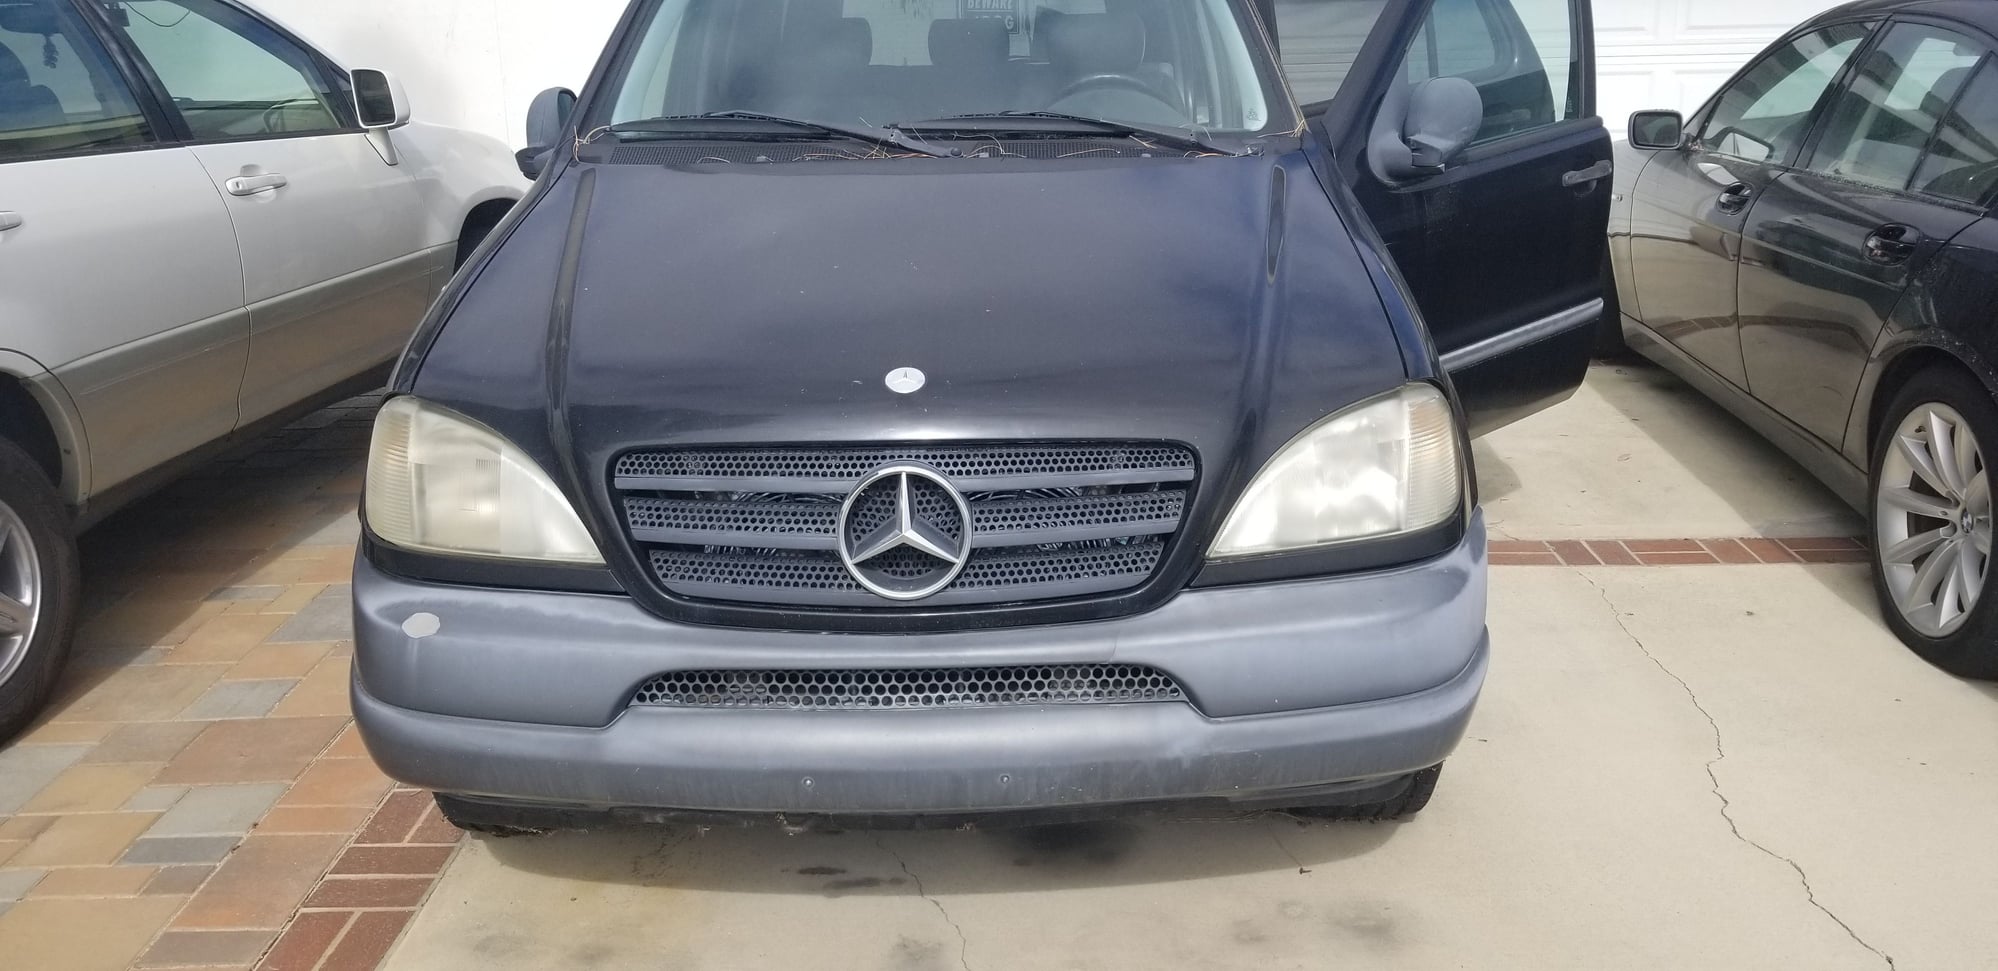 1999 Mercedes-Benz ML320 - $1000   1999 MBZ ML-320 168,200 in Calif Parting Out or Sell Whole - Used - VIN 4jgab54e2xa109562 - 168,200 Miles - 6 cyl - AWD - Automatic - SUV - Black - Huntington Beach, CA 92649, United States